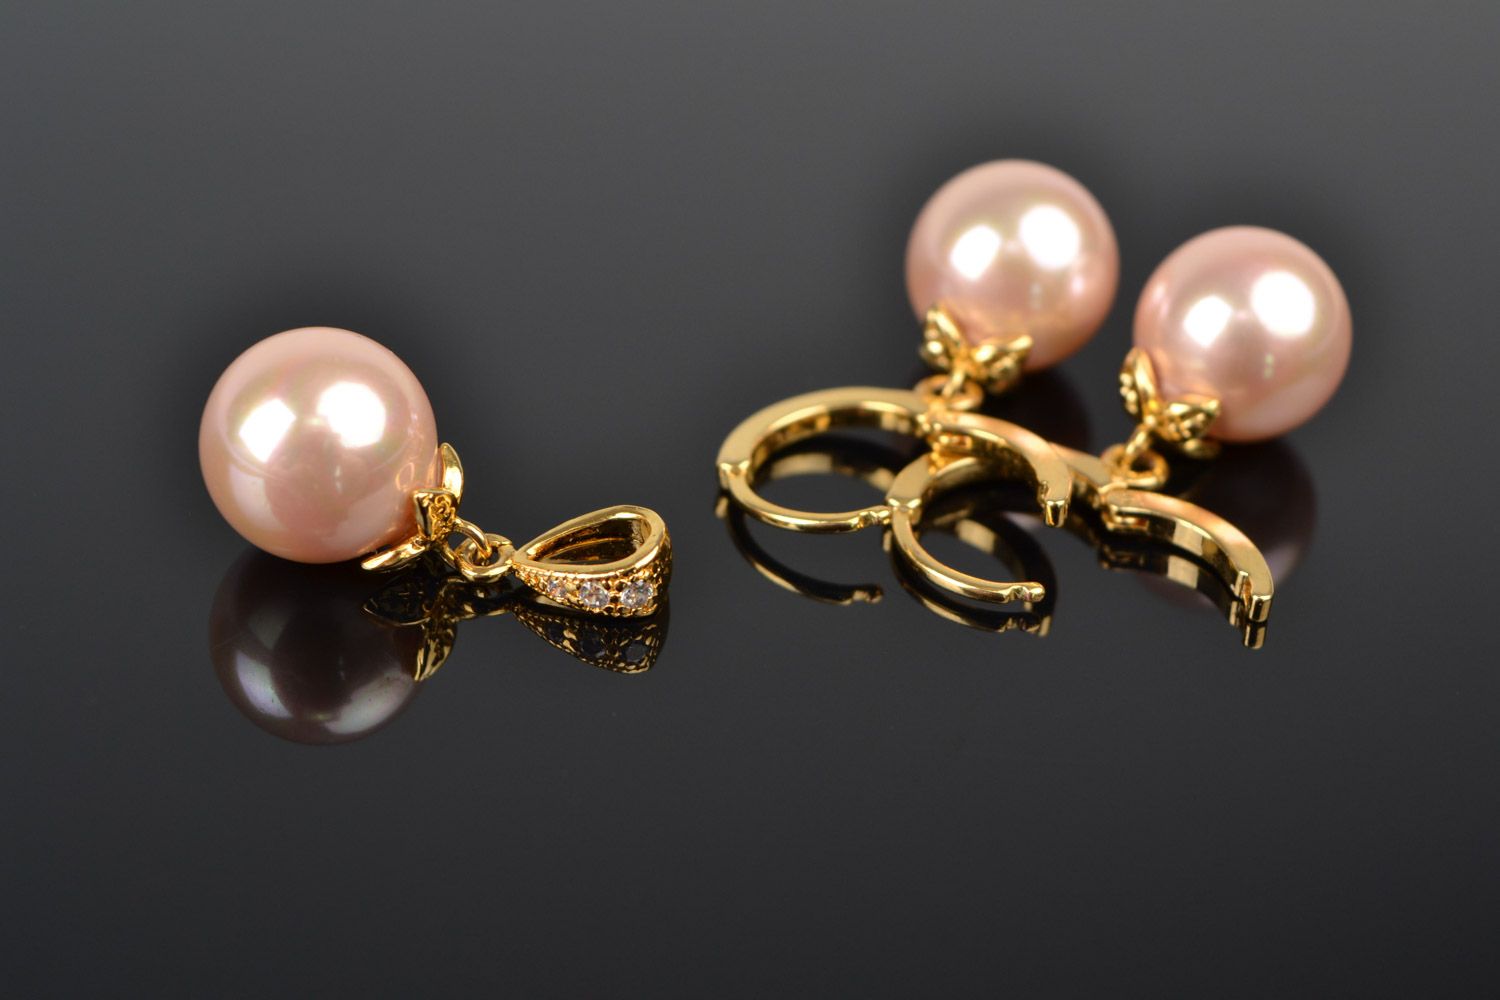 Handmade artificial pearl jewelry set 2 items earrings and pendant with gold like fittings photo 3